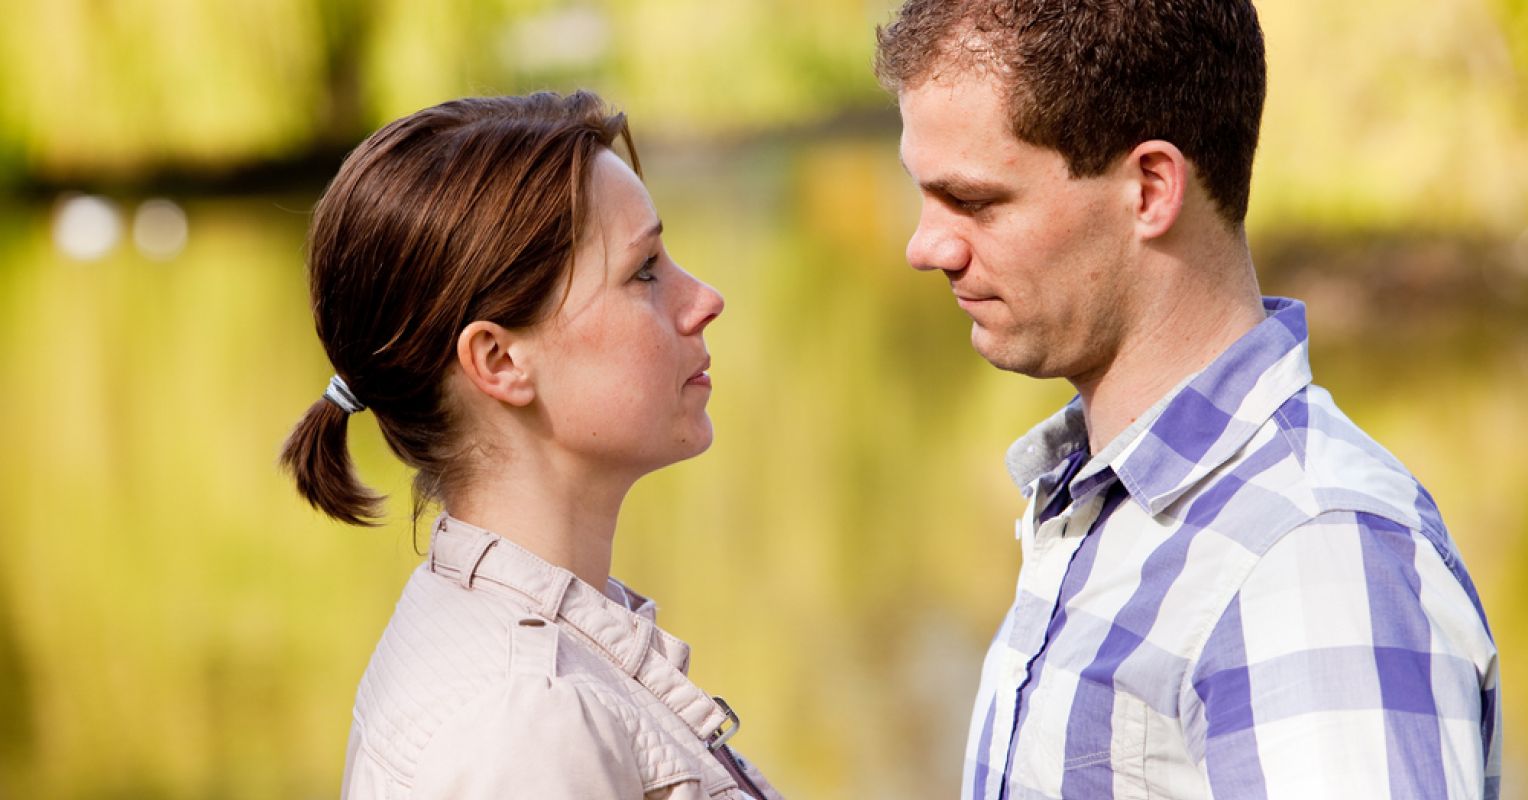 How to Tell Your Partner You Are Not Physically Attracted Psychology Today